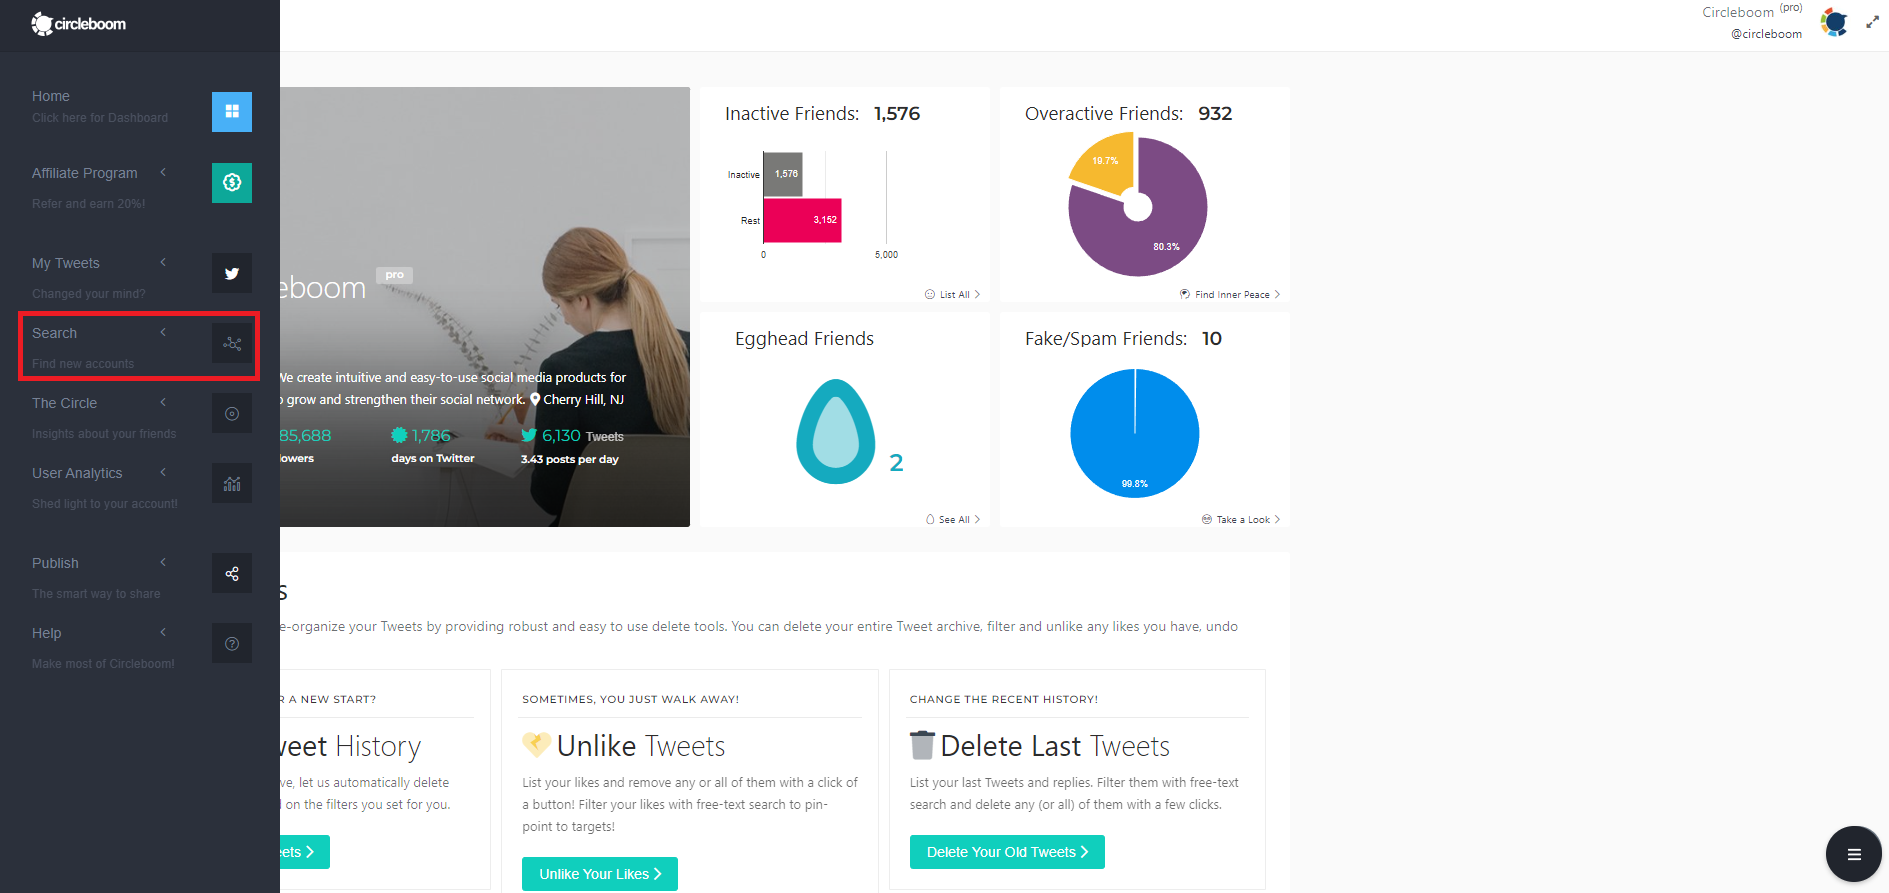 Circleboom Twitter dashboard allows searching verified followers on Twitter